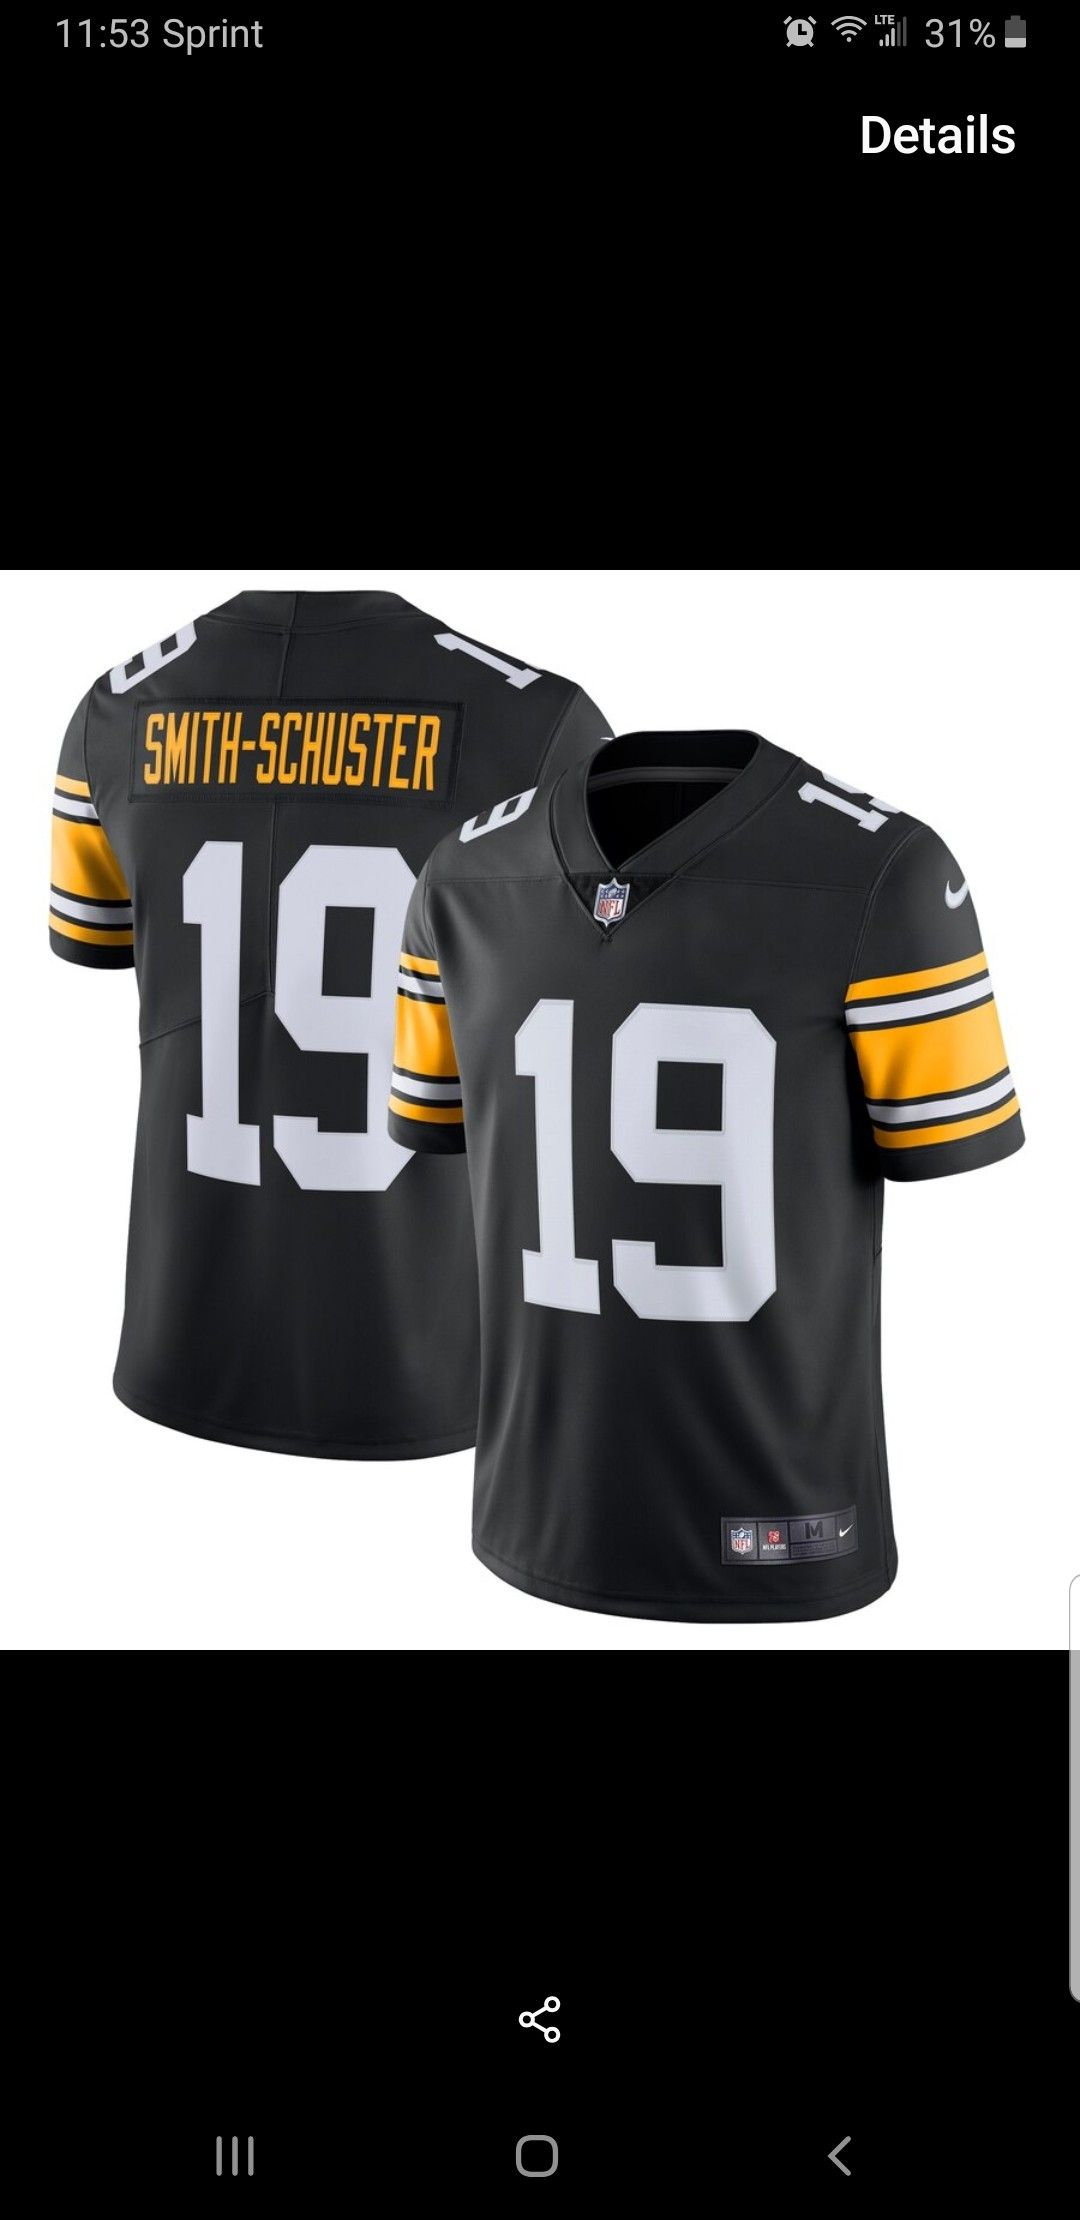 STEELERS JUJU SMITH-SCHUSTER JERSEY SIZE SM n med n 3XL 100% STITCHED